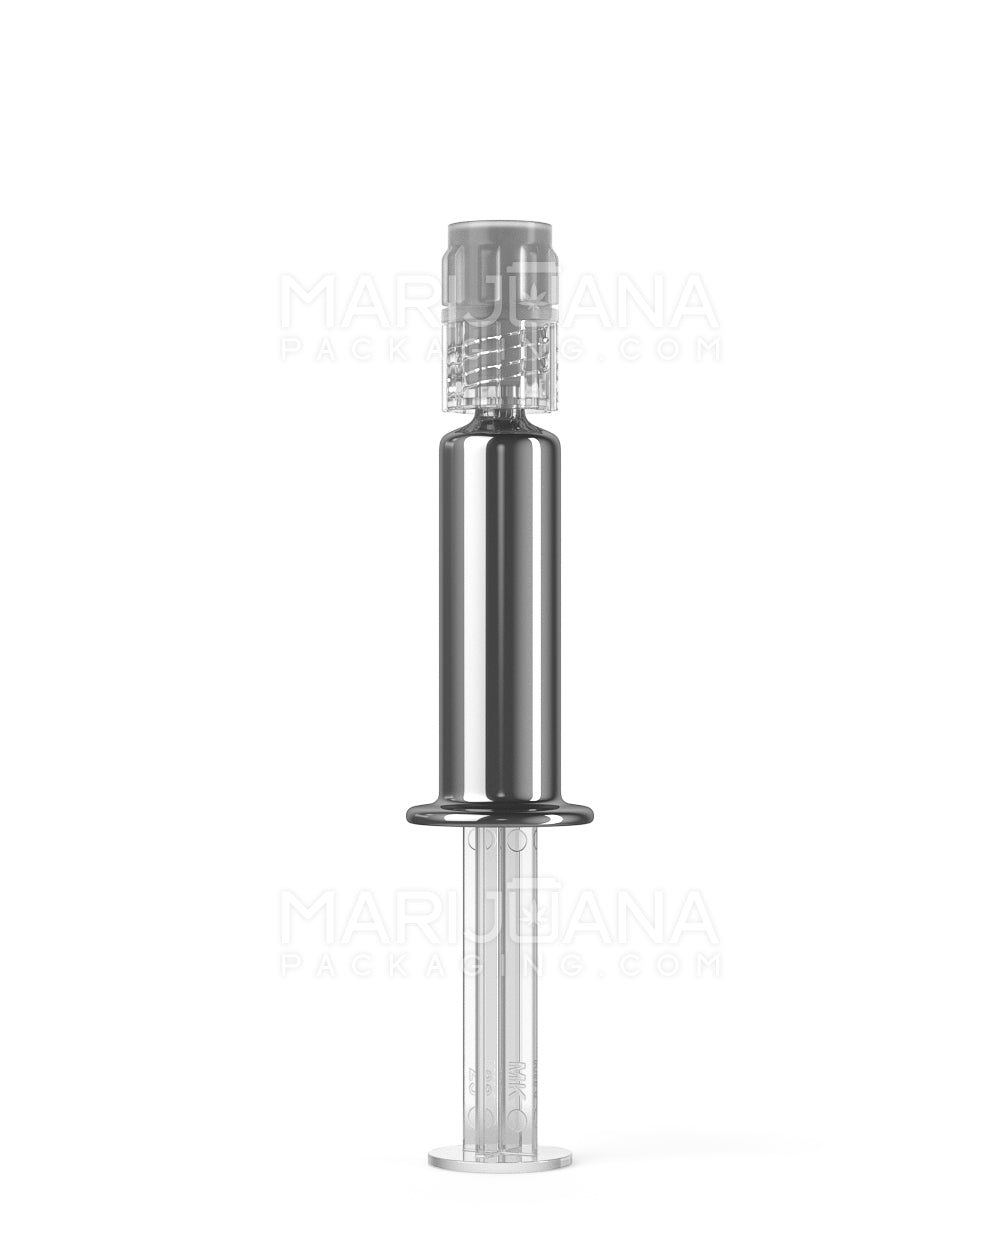 Luer Lock | Silver Glass Dab Applicator Syringes | 1mL - No Measurements - 100 Count - 1